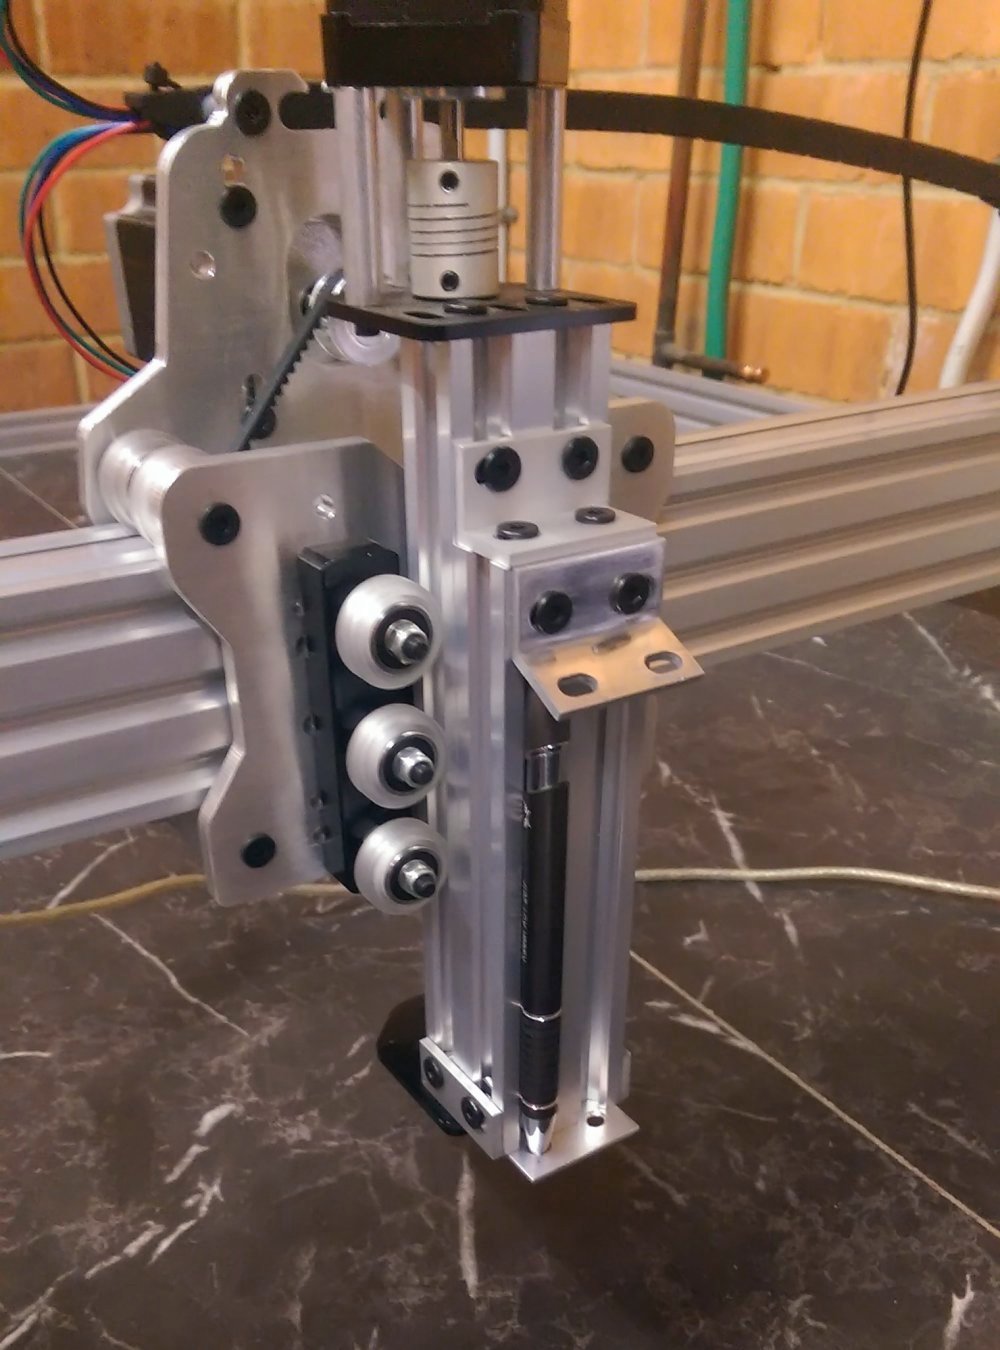 Photo of the pen holder attached to the CNC